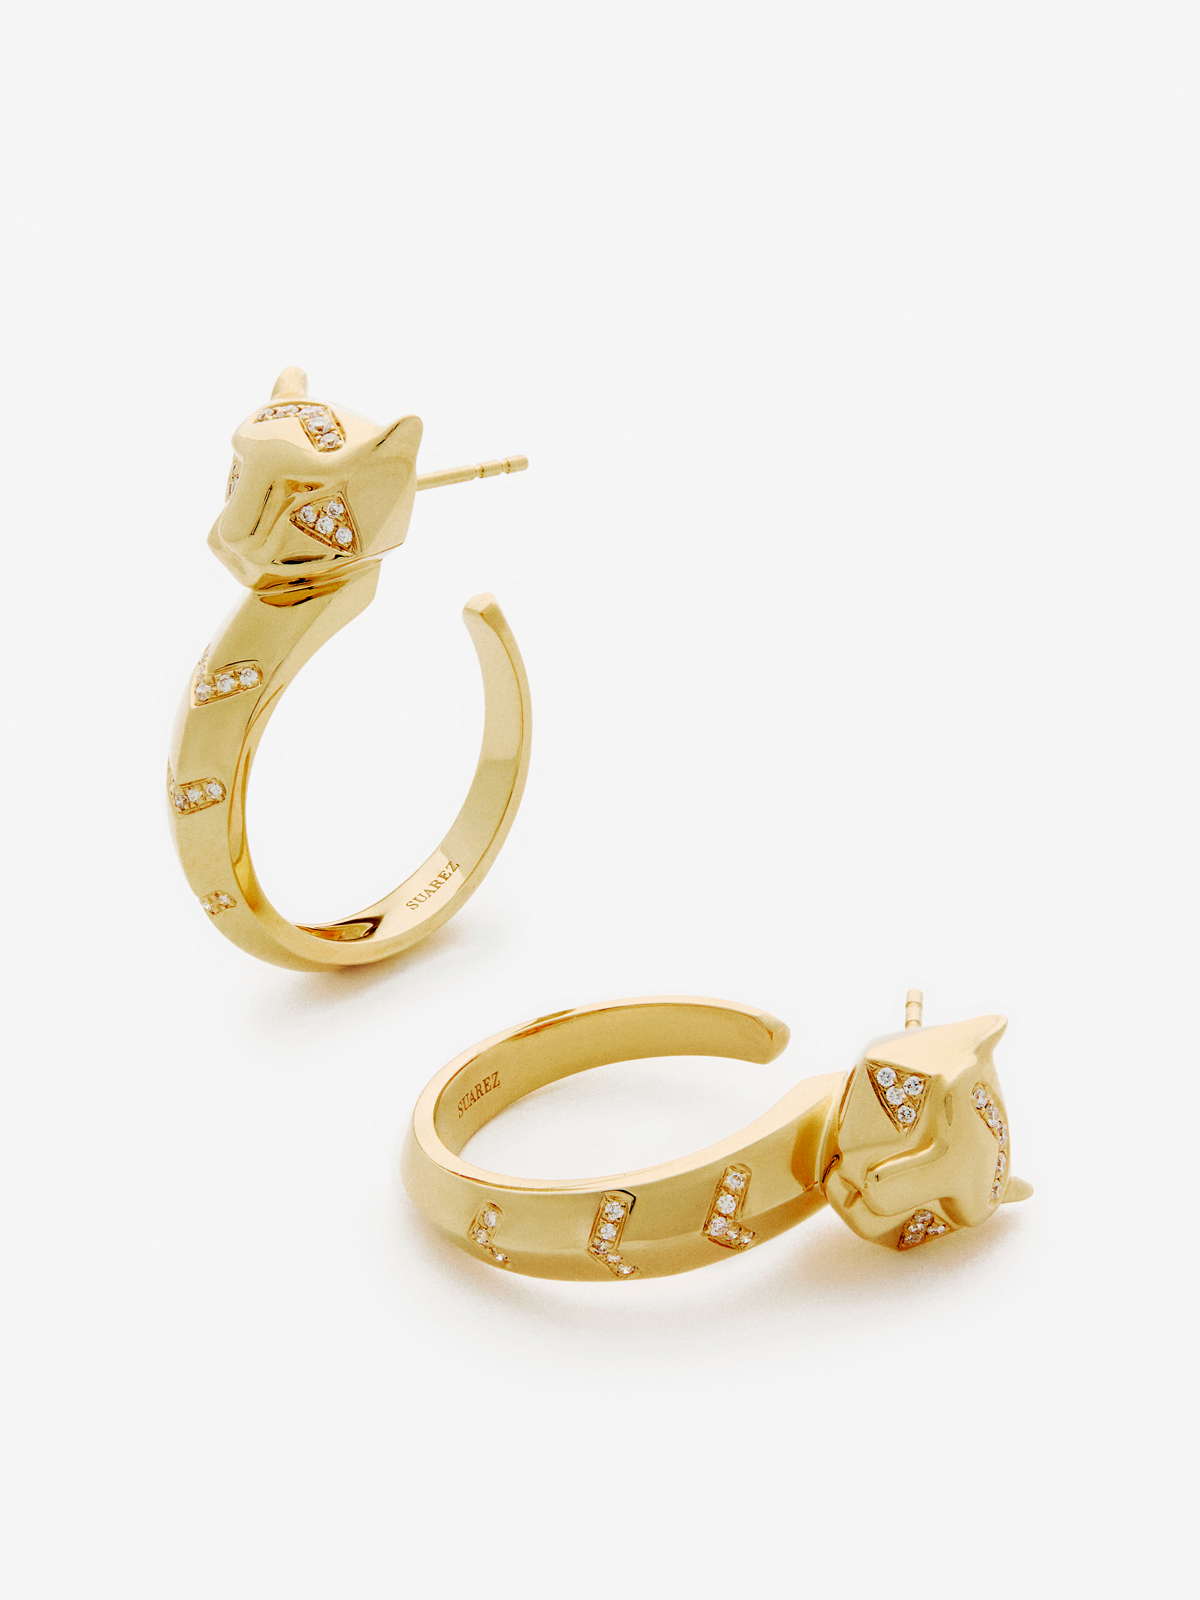 18K yellow gold hoop earrings with 0.16 ct brilliant cut diamonds in the shape of a tiger